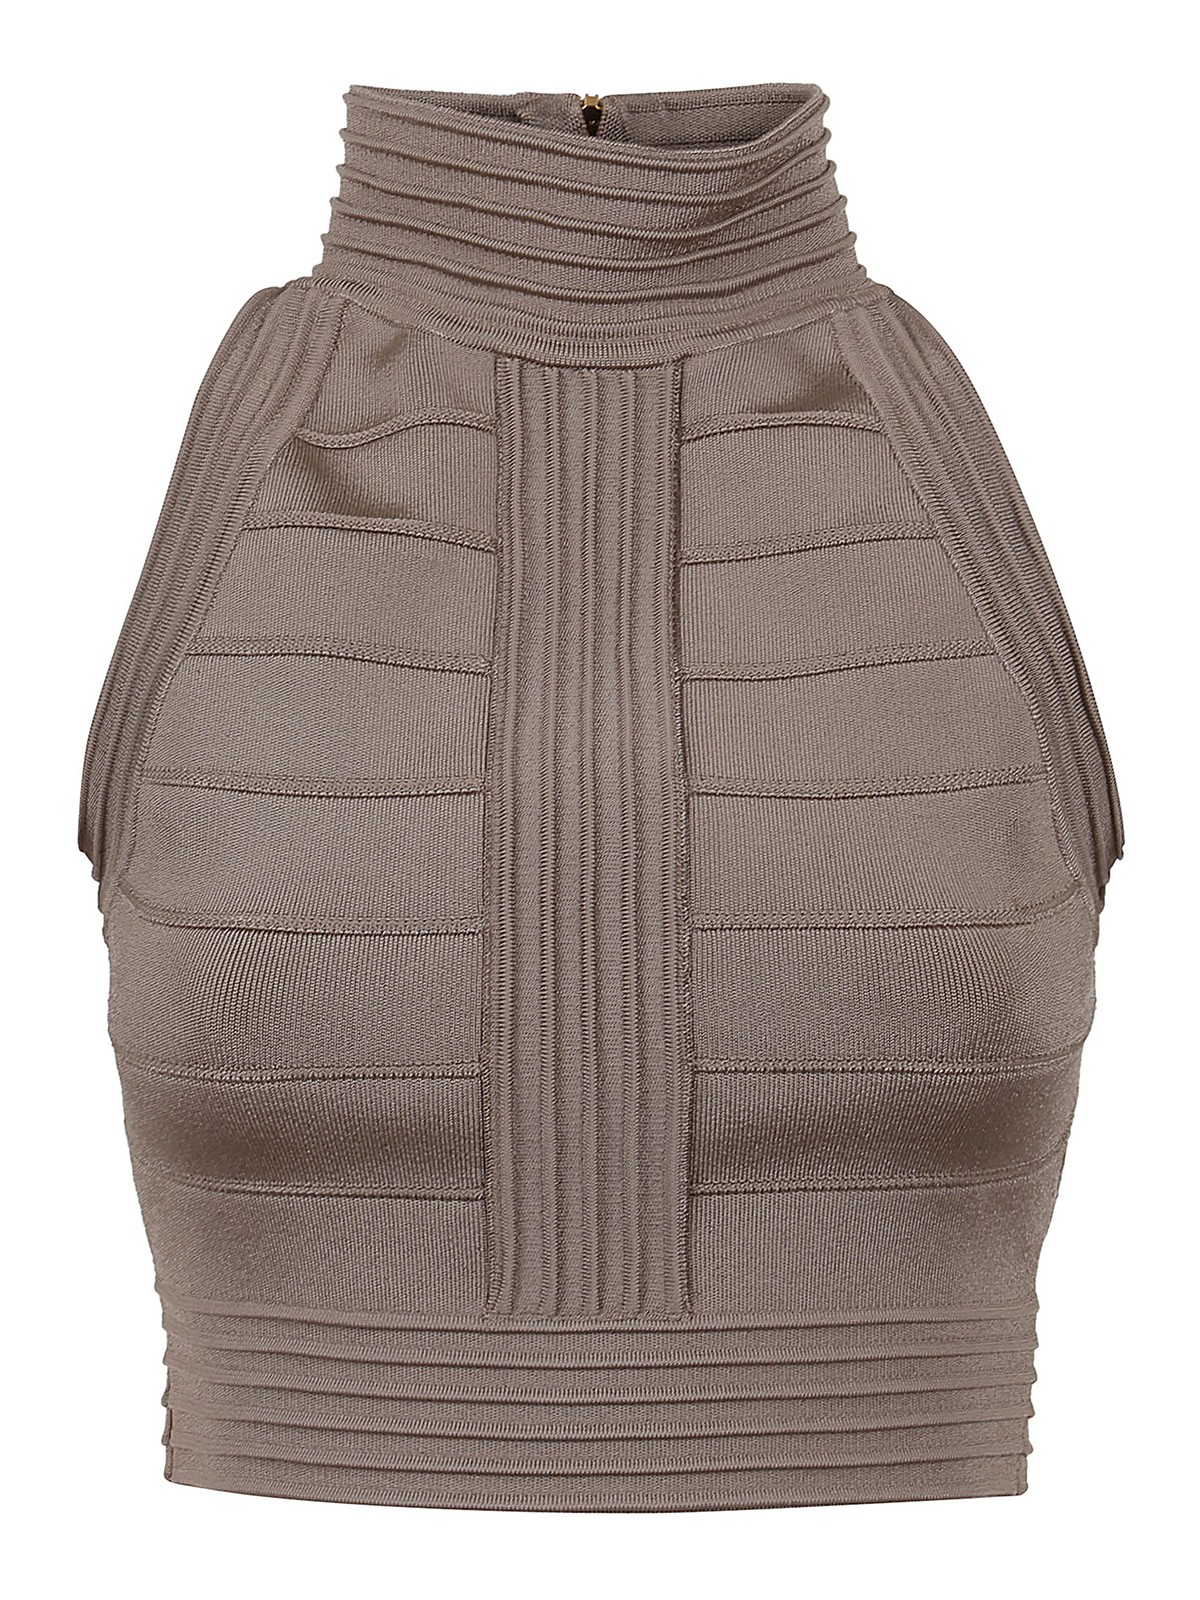 Balmain Zipped Knit Gilet With High Neck In Light Brown